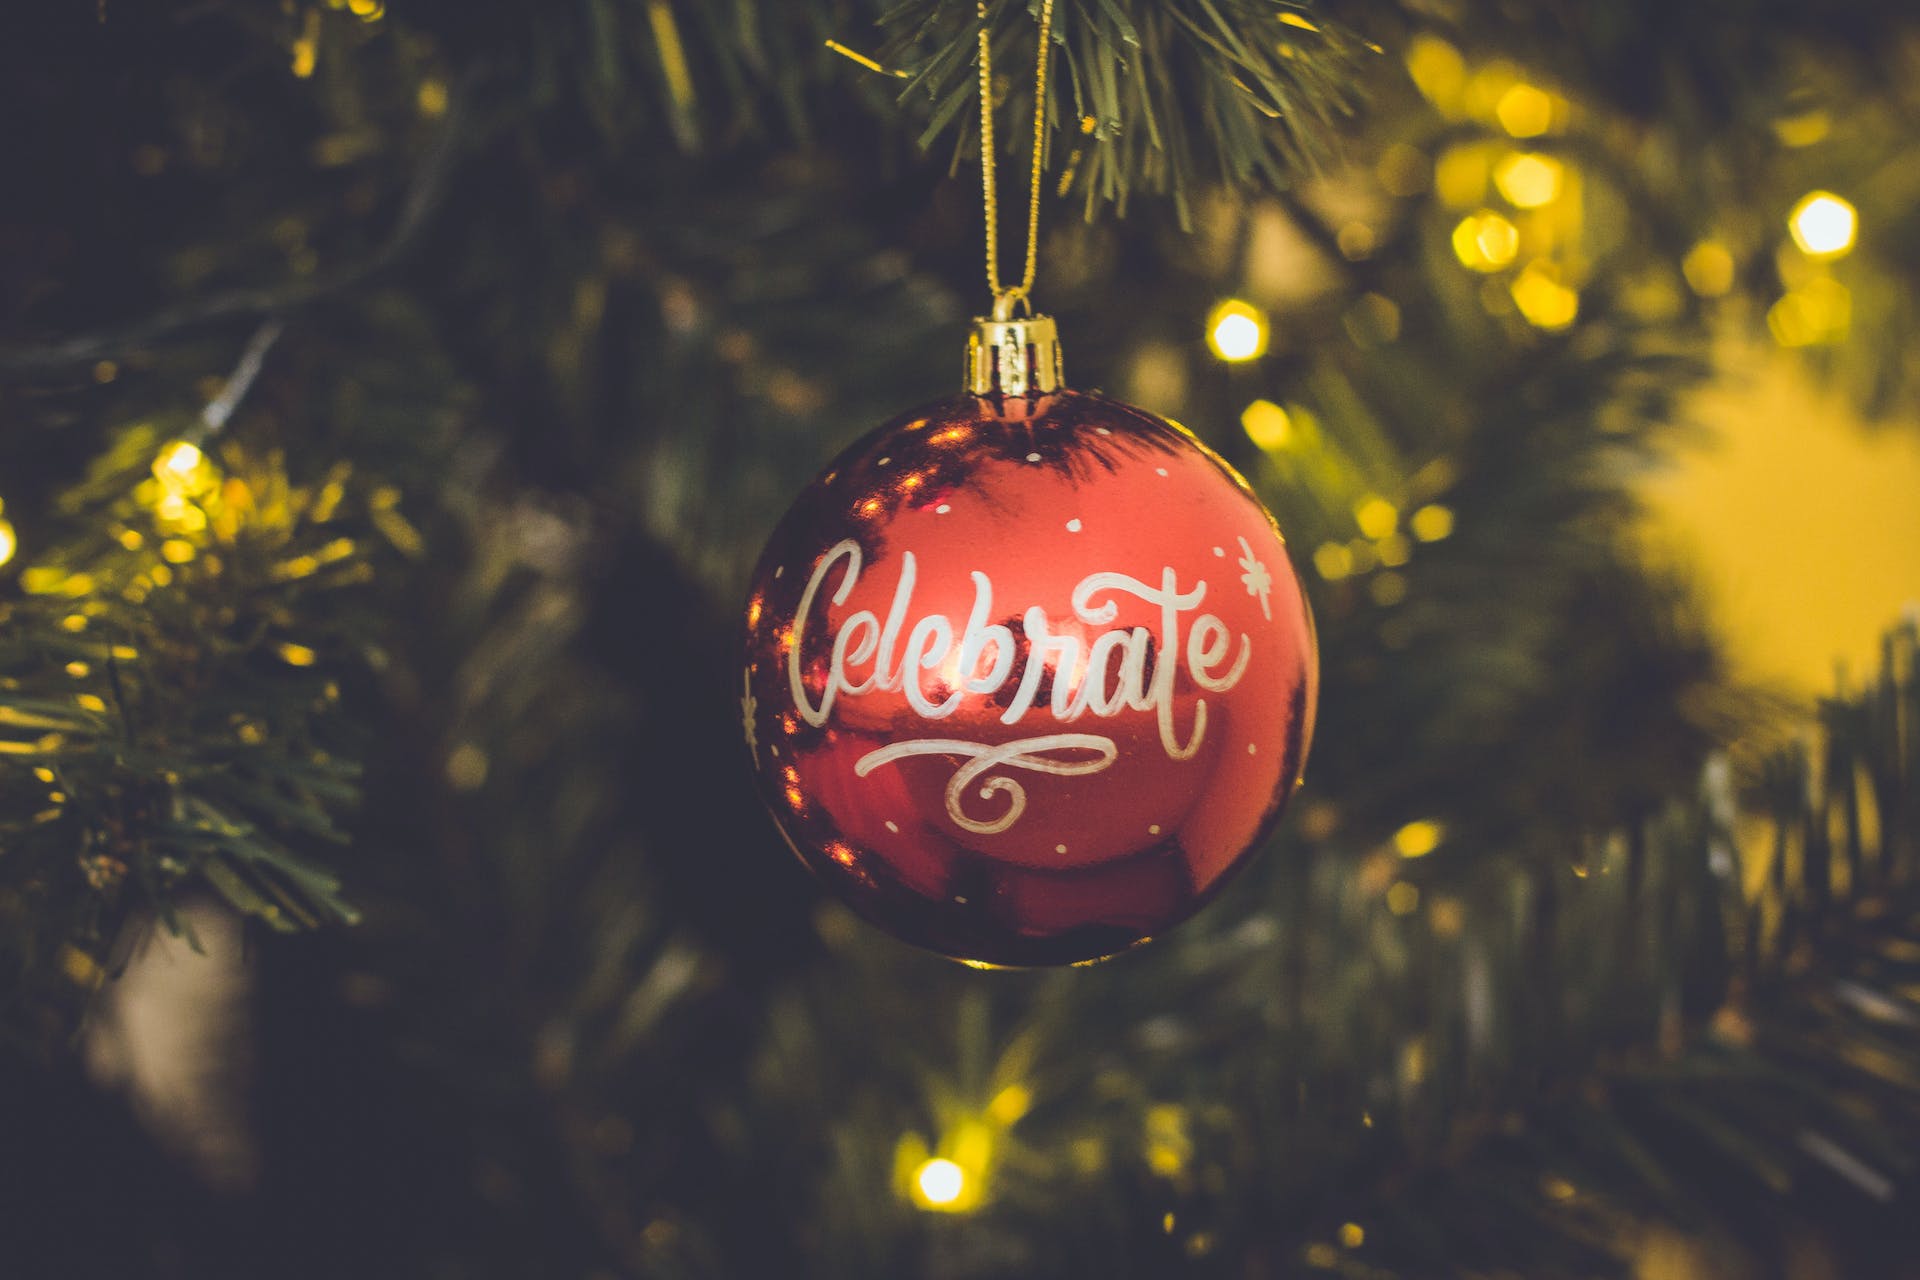 'Celebrate' etched on a Christmas ornament.